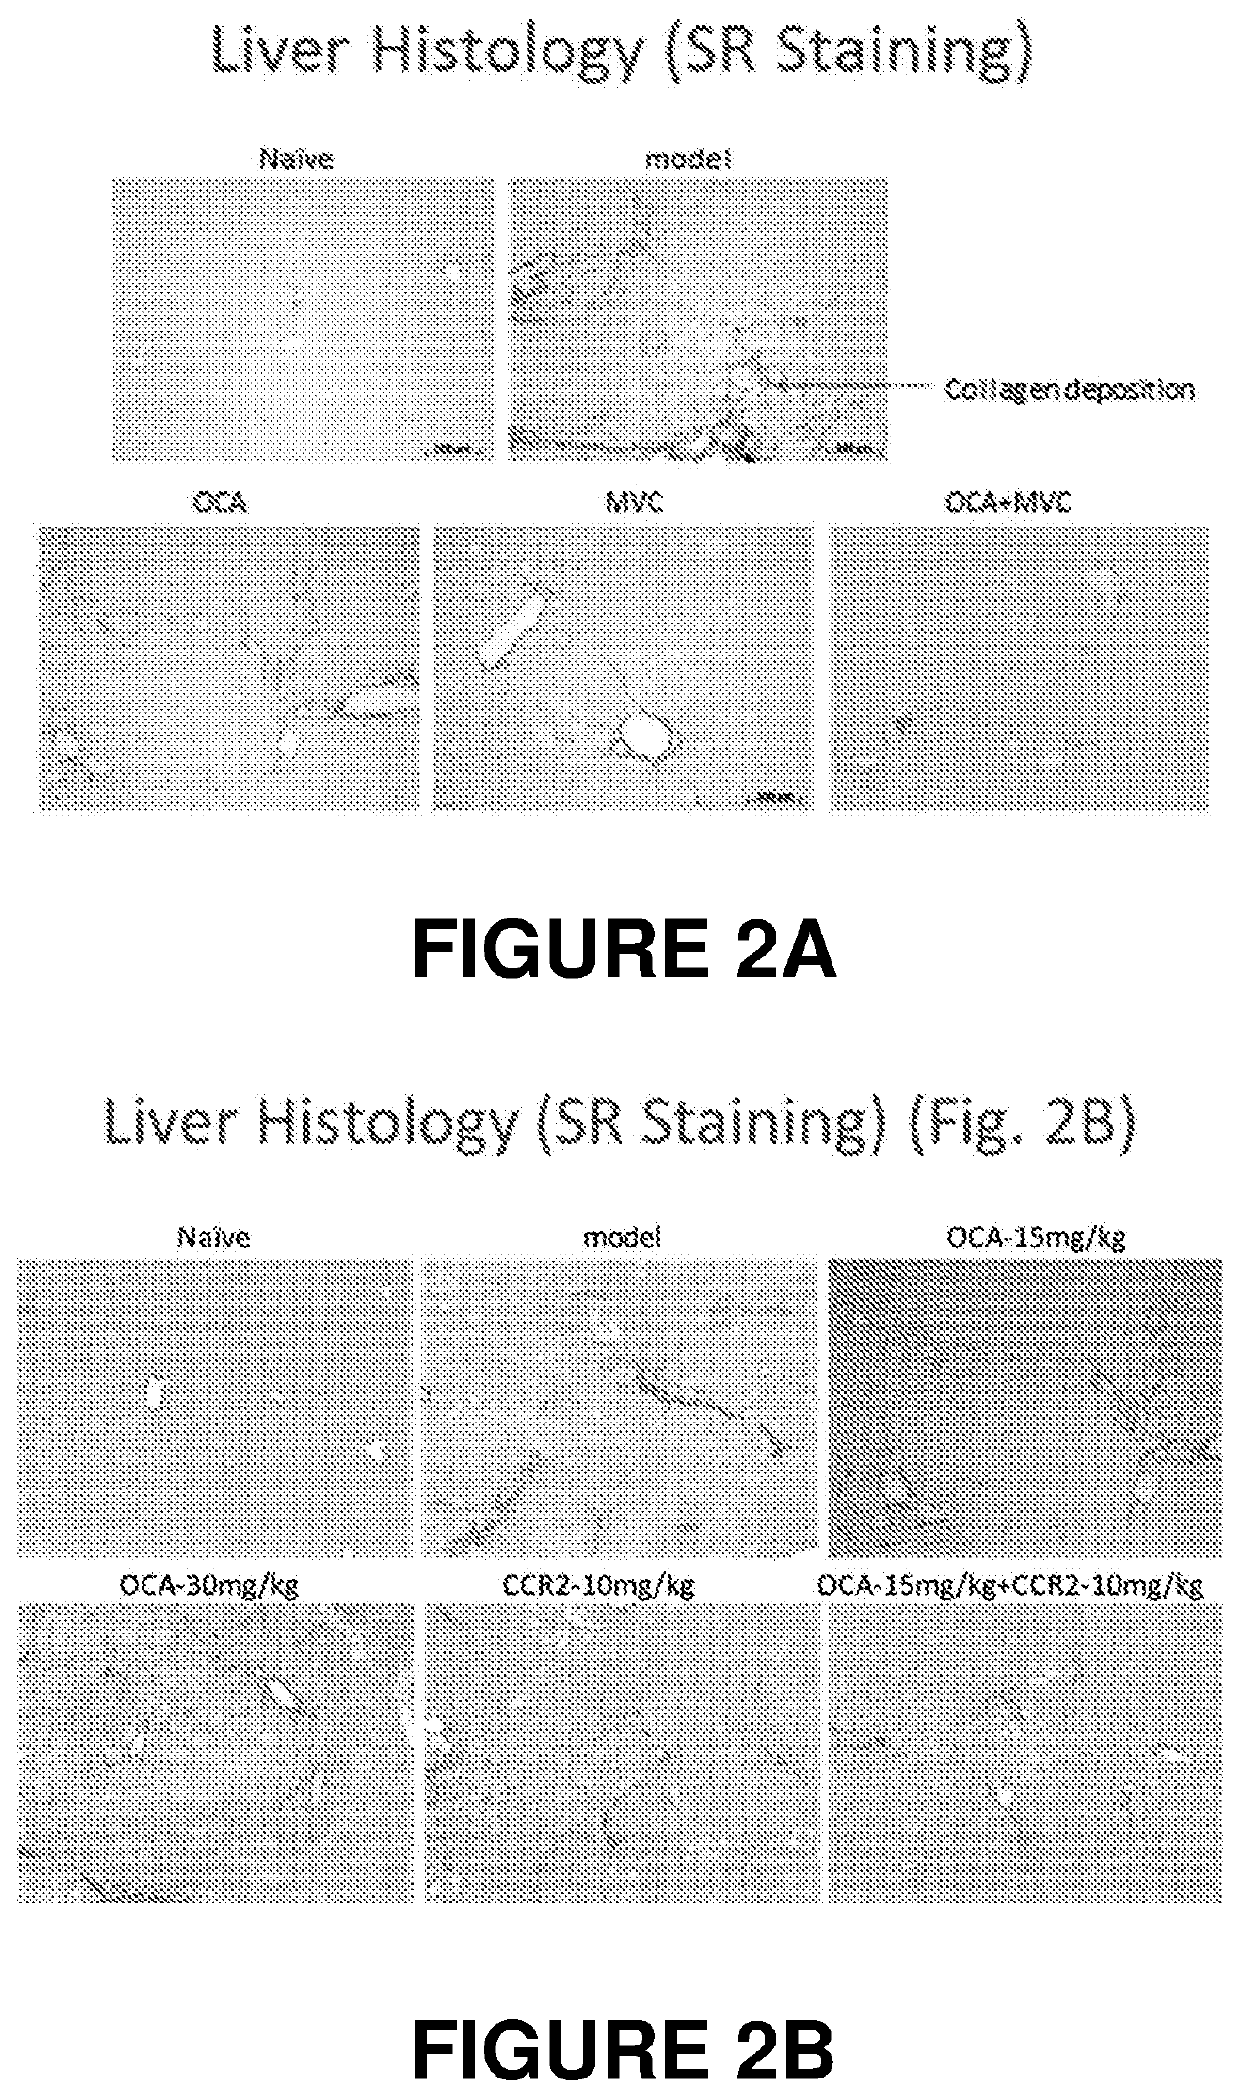 Combination therapy for nonalcoholic steatohepatitis (NASH) and liver fibrosis